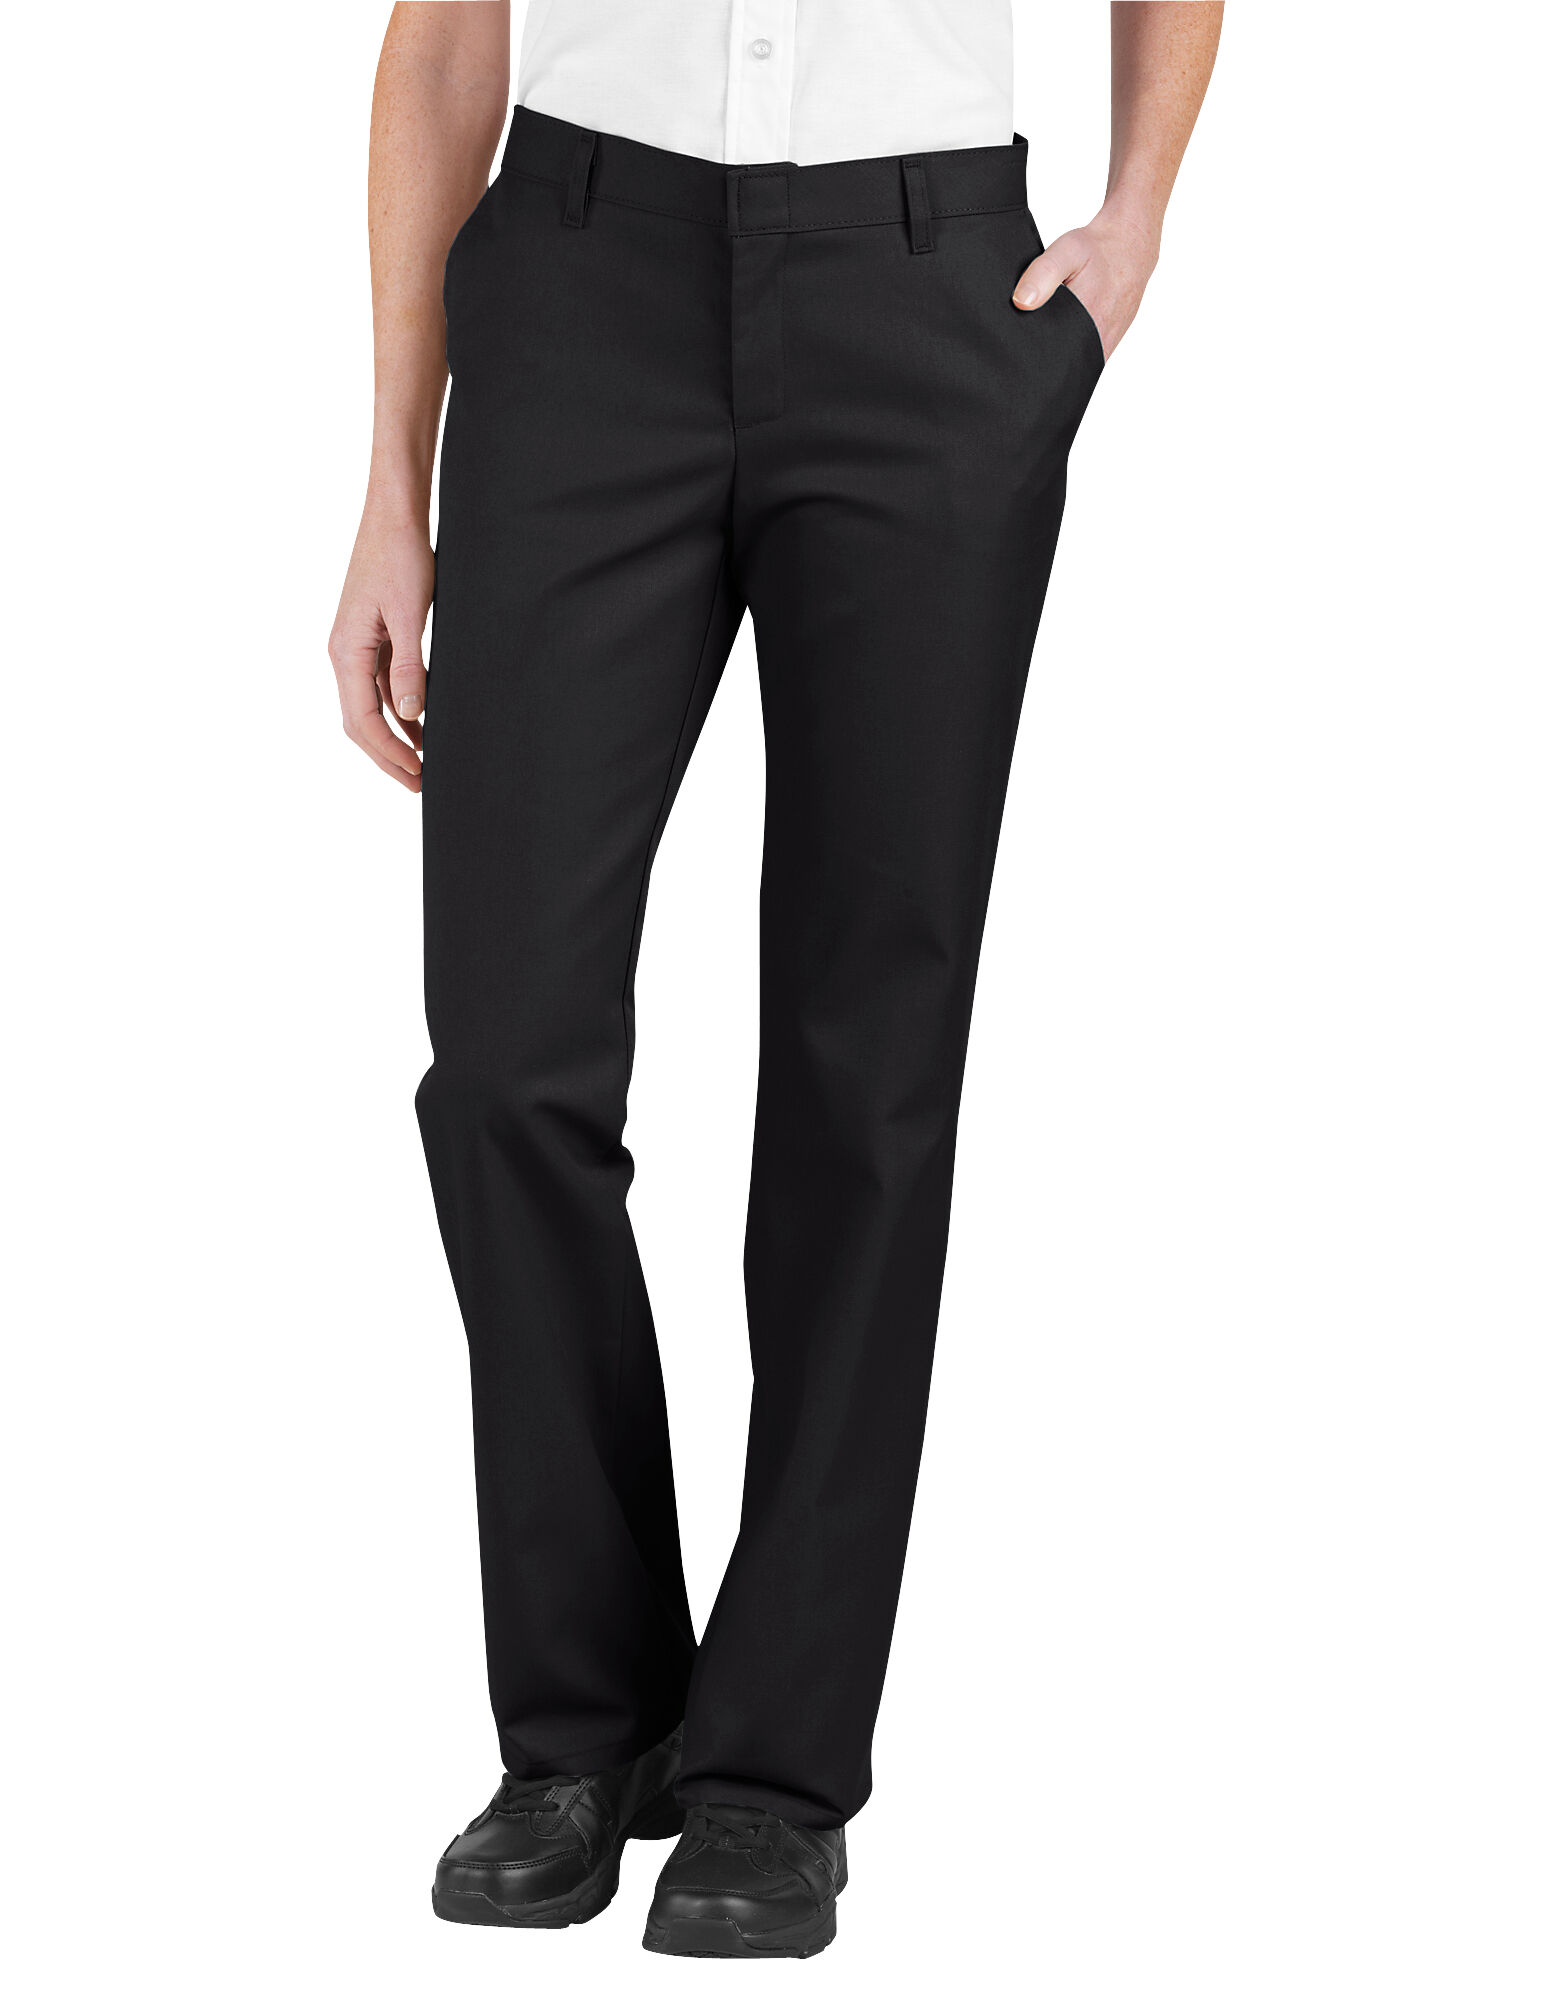 Women's Relaxed Fit Flat Front Pants | Dickies